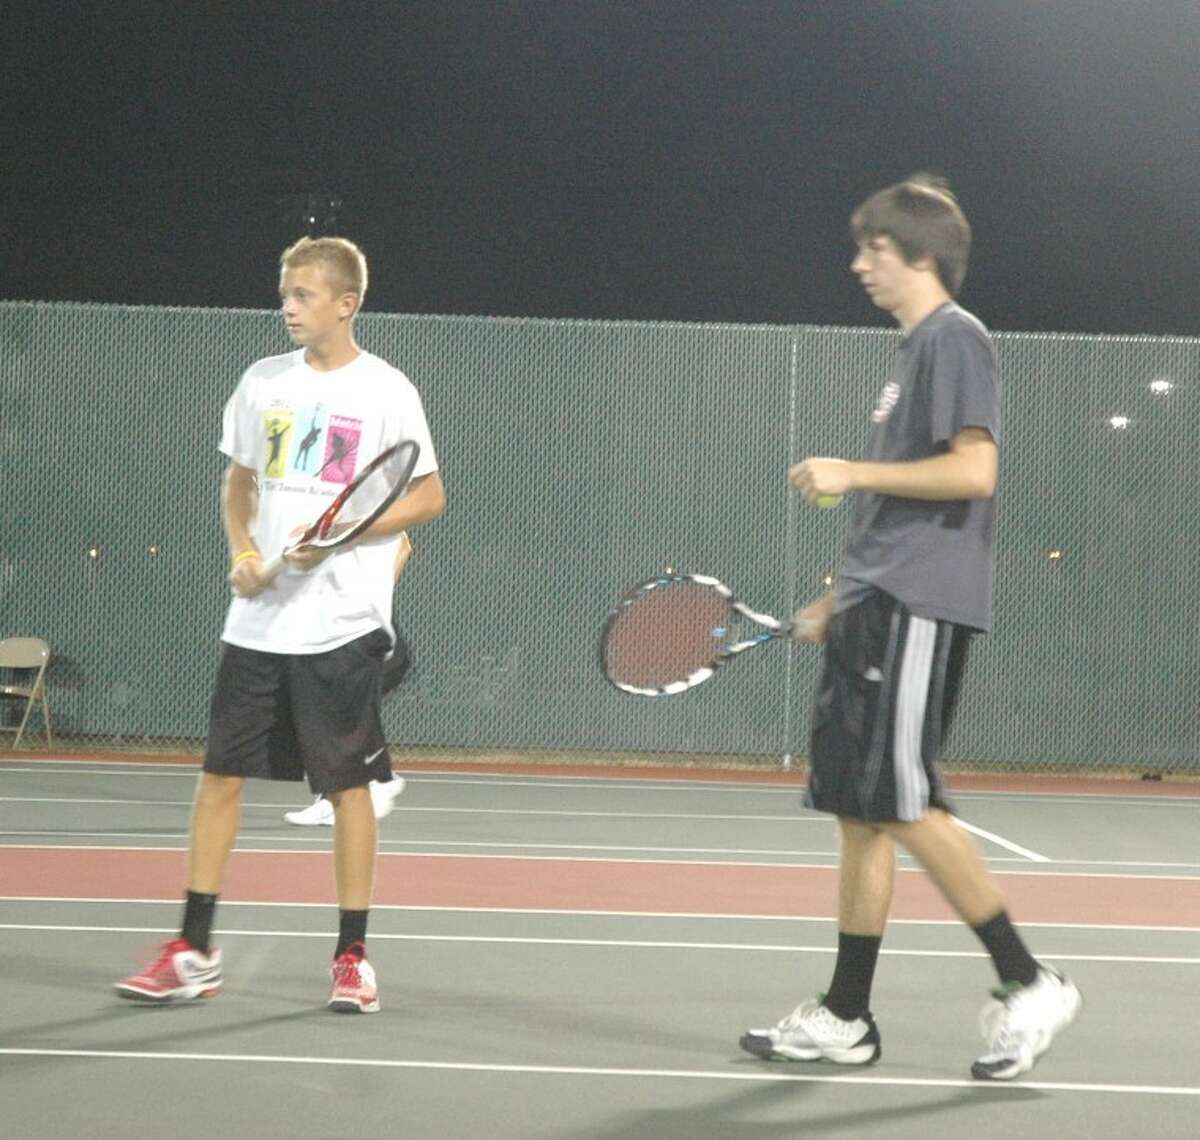 Edwardsville players, Jack Desse, left, and Cameron Randall, right, compete in doubles action Monday in the wildcard tournament at the EHS Tennis Center.